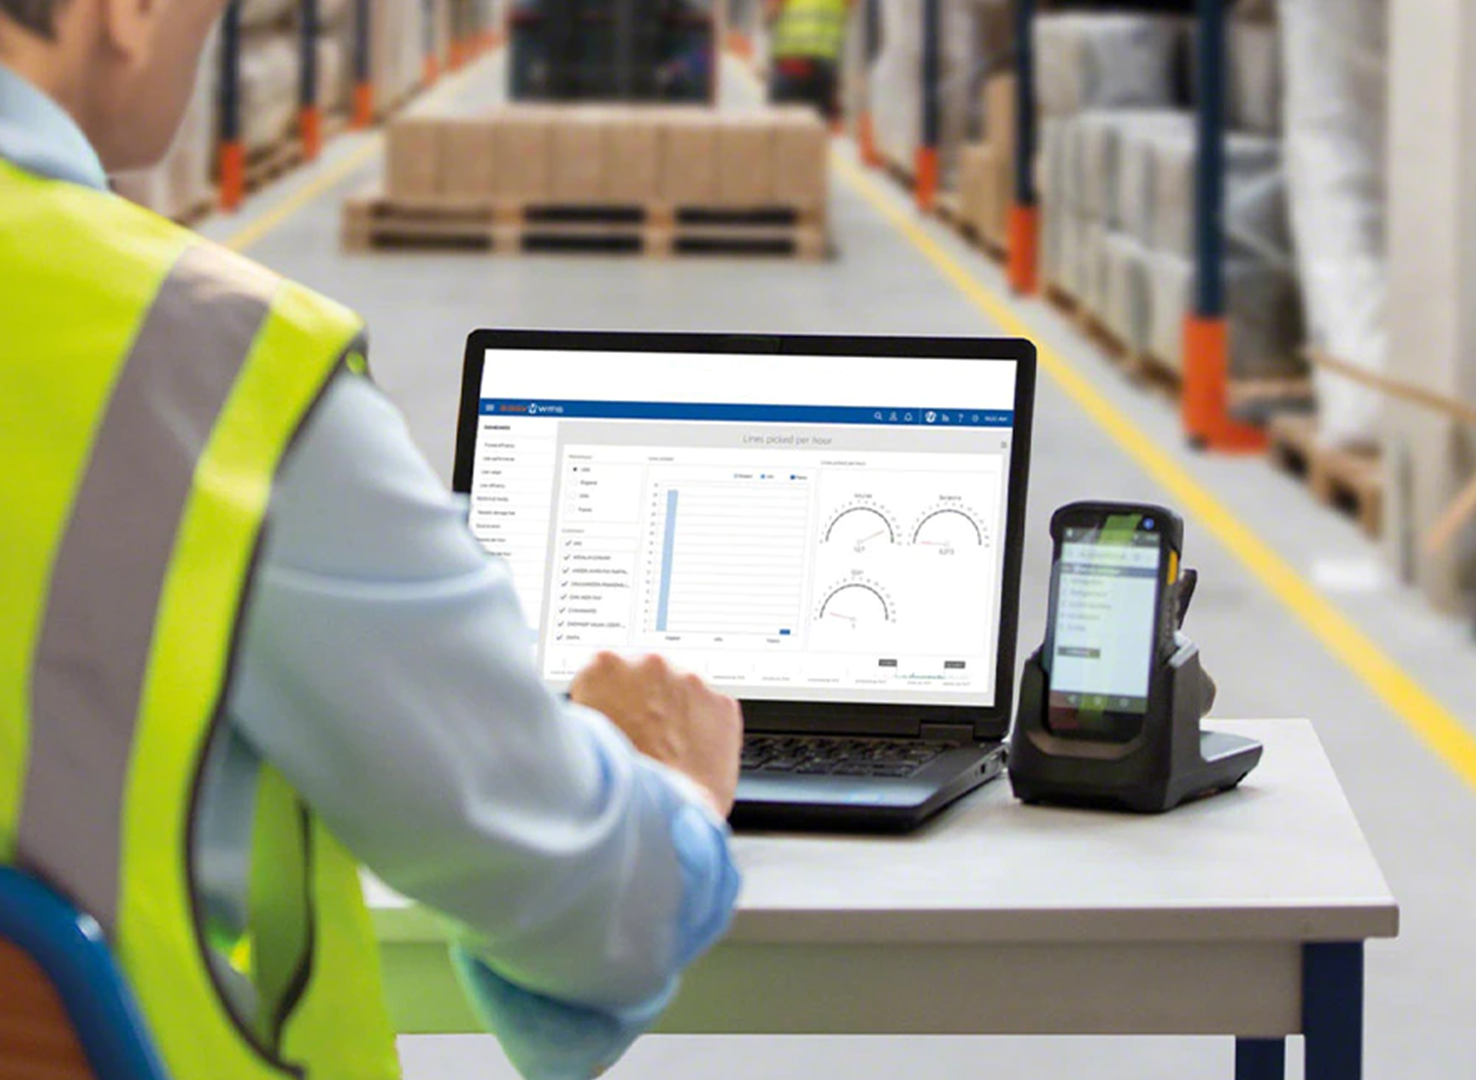 How to build warehouse management software in 2023